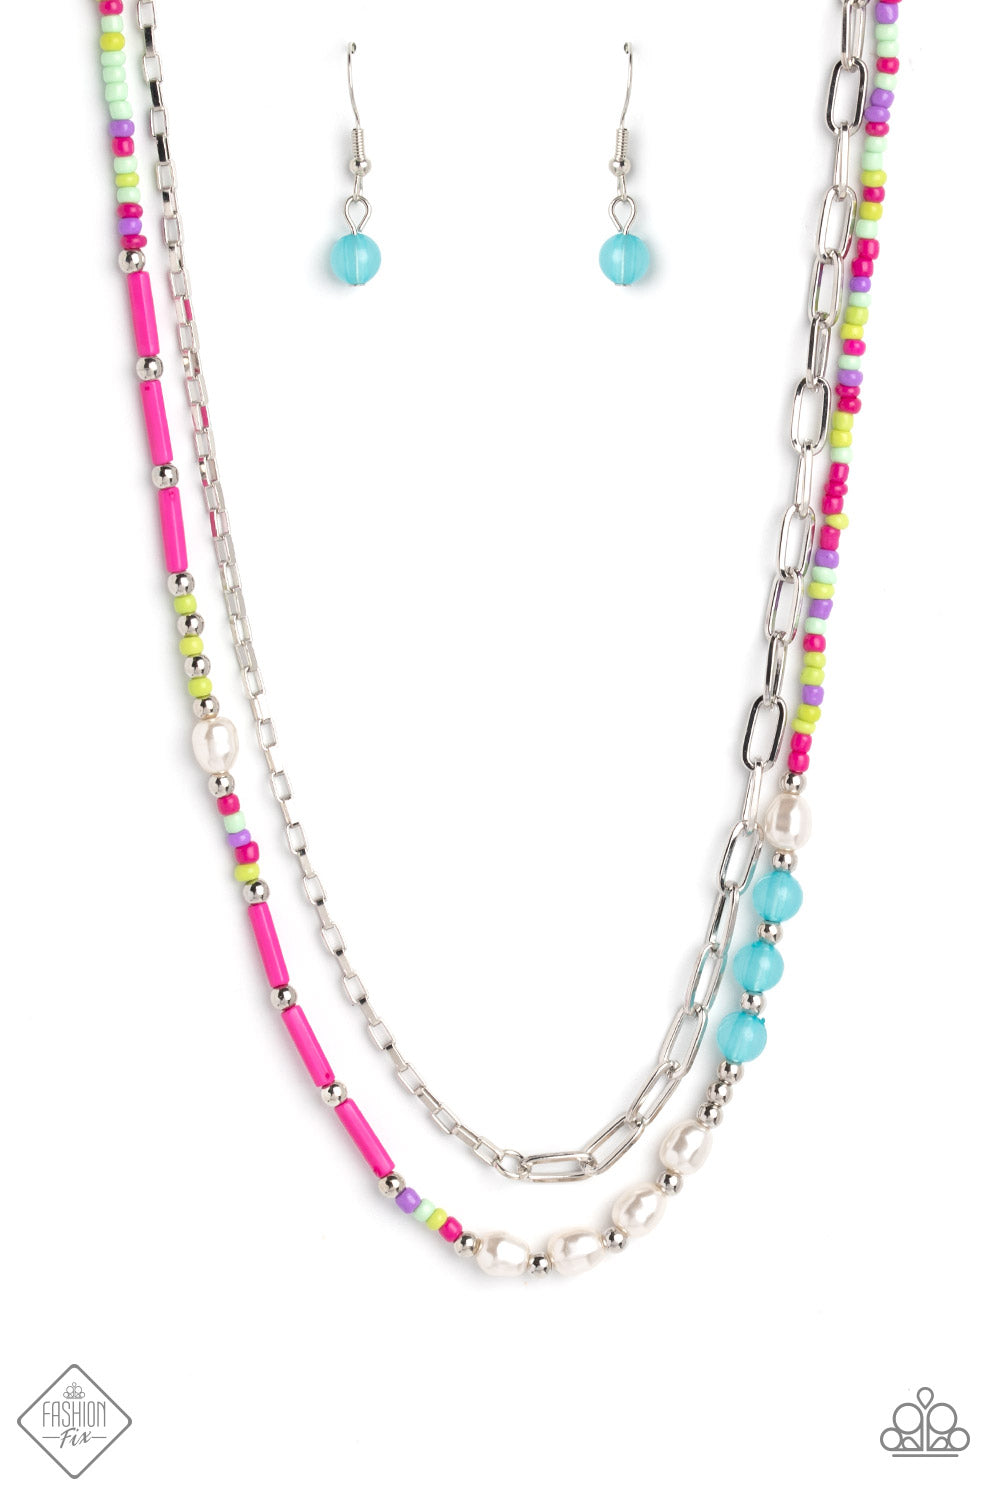 Coastal Composition Paparazzi Accessories Necklace with Earrings